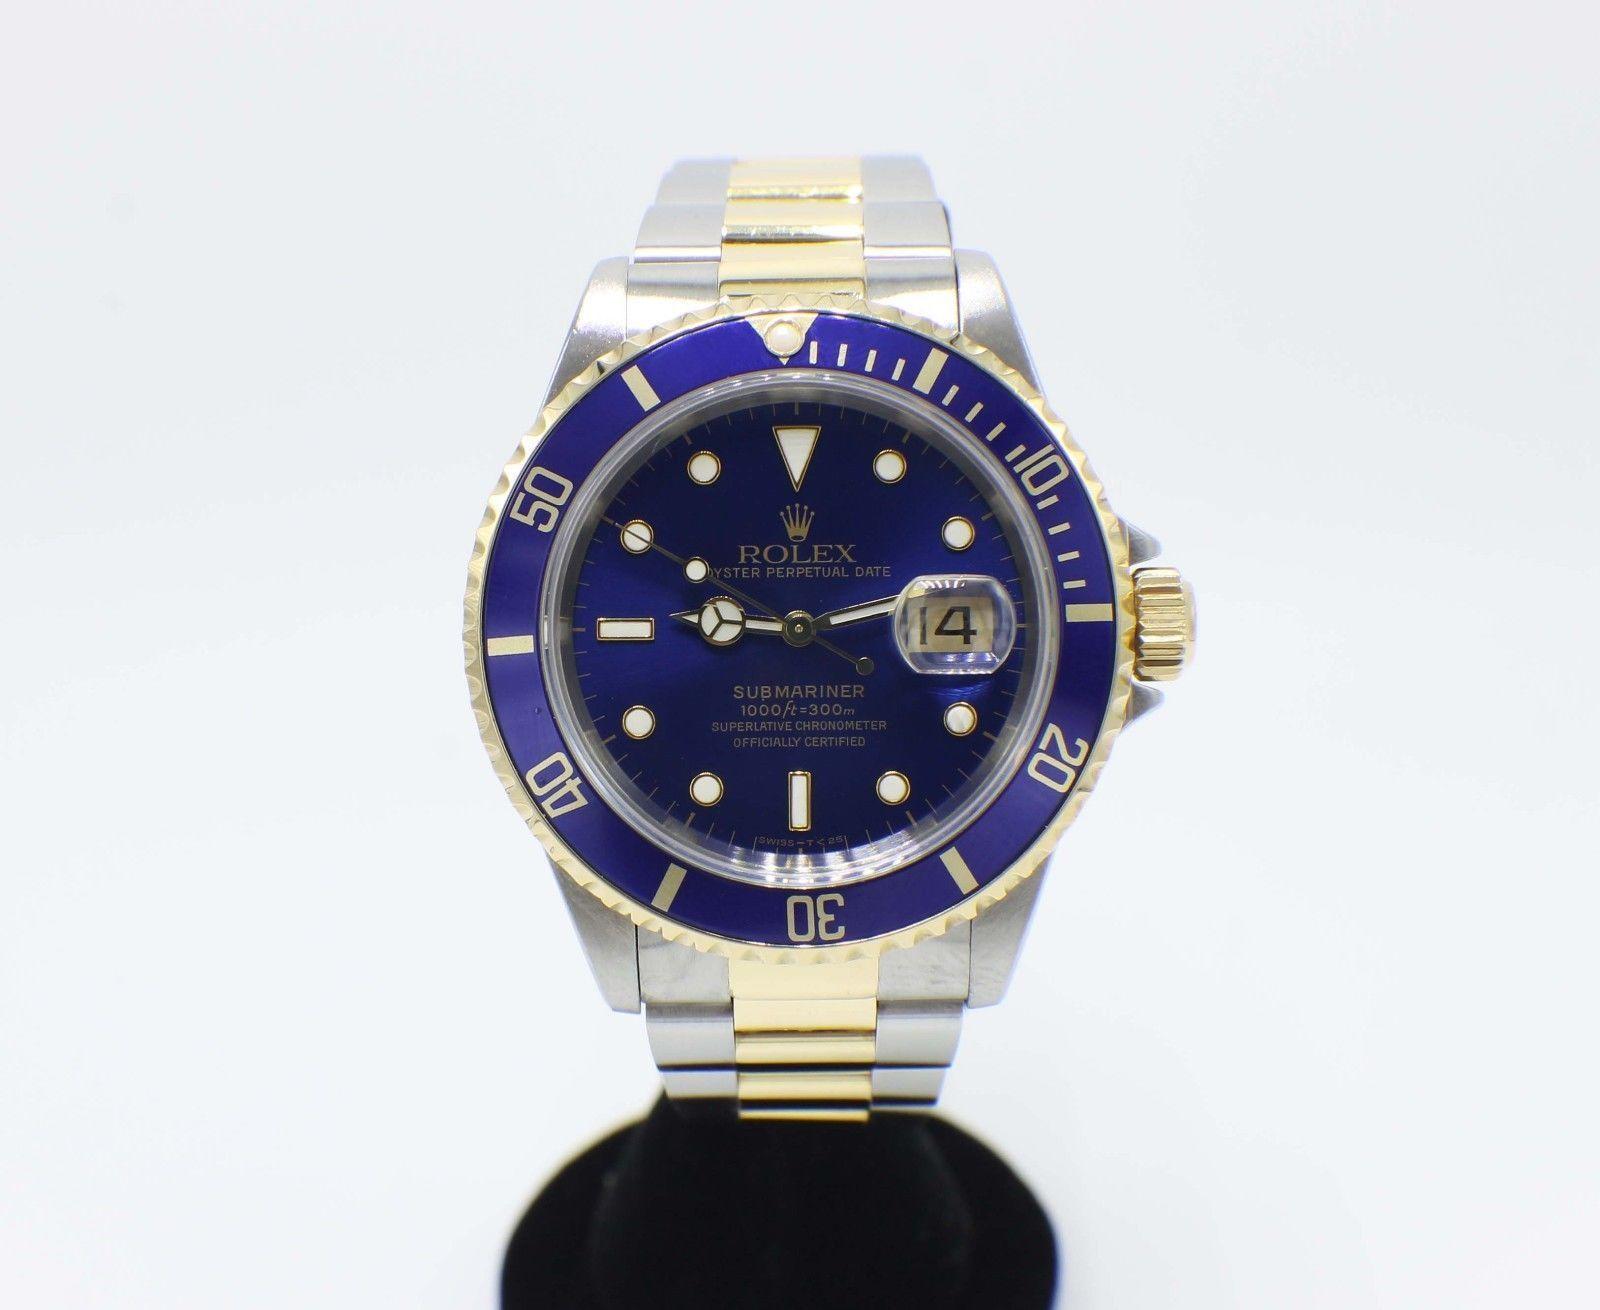 Style Number: 16613
 
Serial: U657***
 
Model: Submariner 
 
Case Material: Stainless Steel 
 
Band: 18K Yellow Gold & Stainless Steel
 
Bezel: Blue 
 
Dial: Blue 
 
Face: Sapphire Crystal 
 
Case Size: 40mm
 
Includes: 
-Rolex Box &